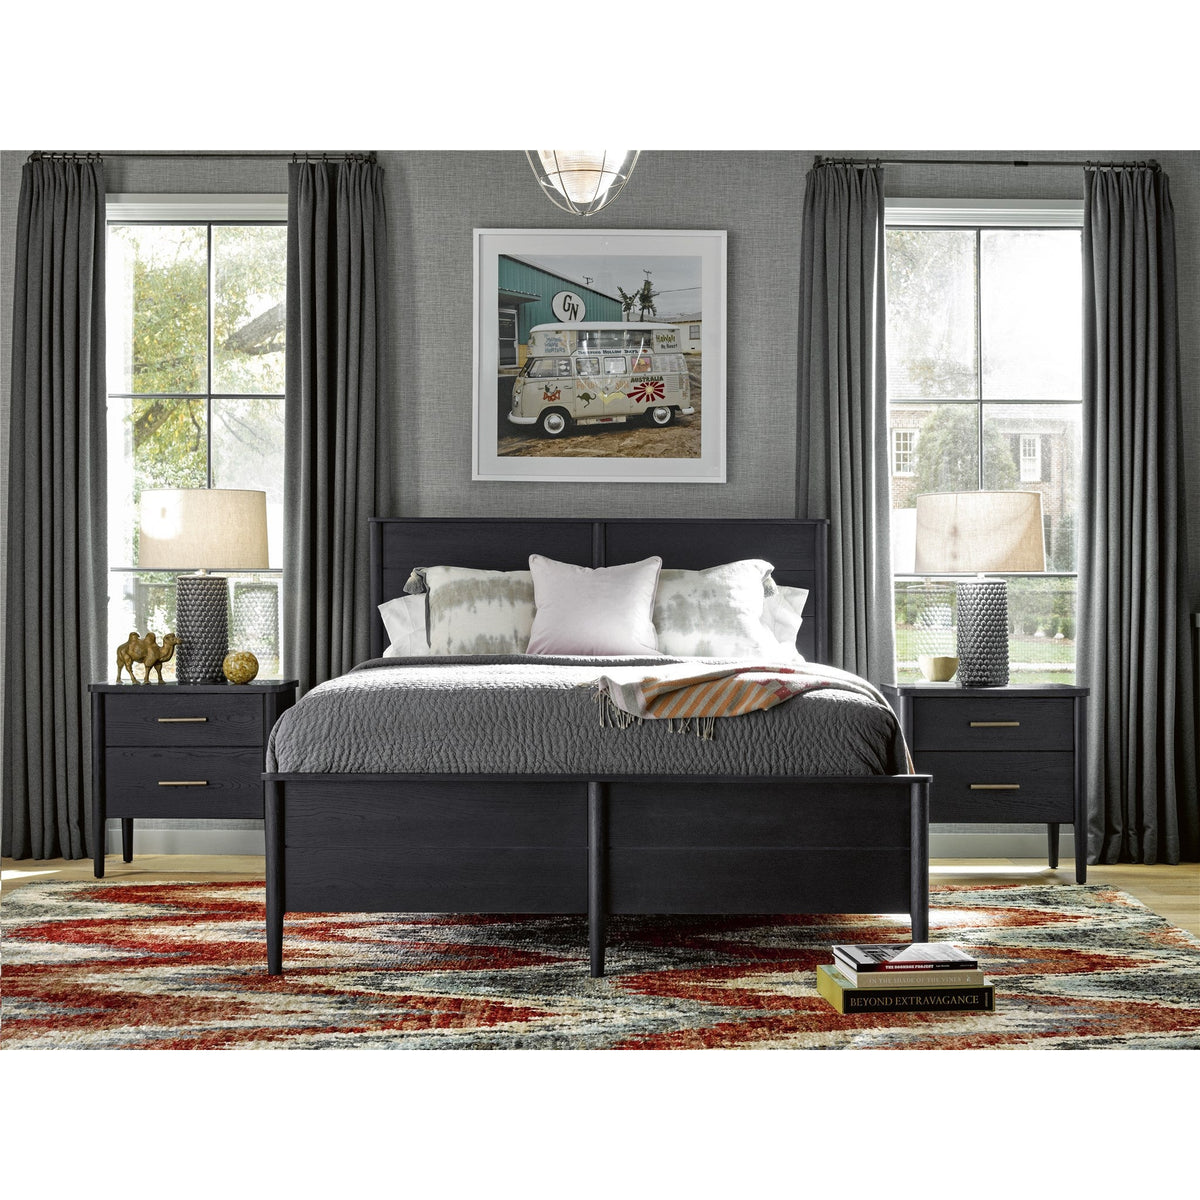 Langley Queen Bed - Be Bold Furniture